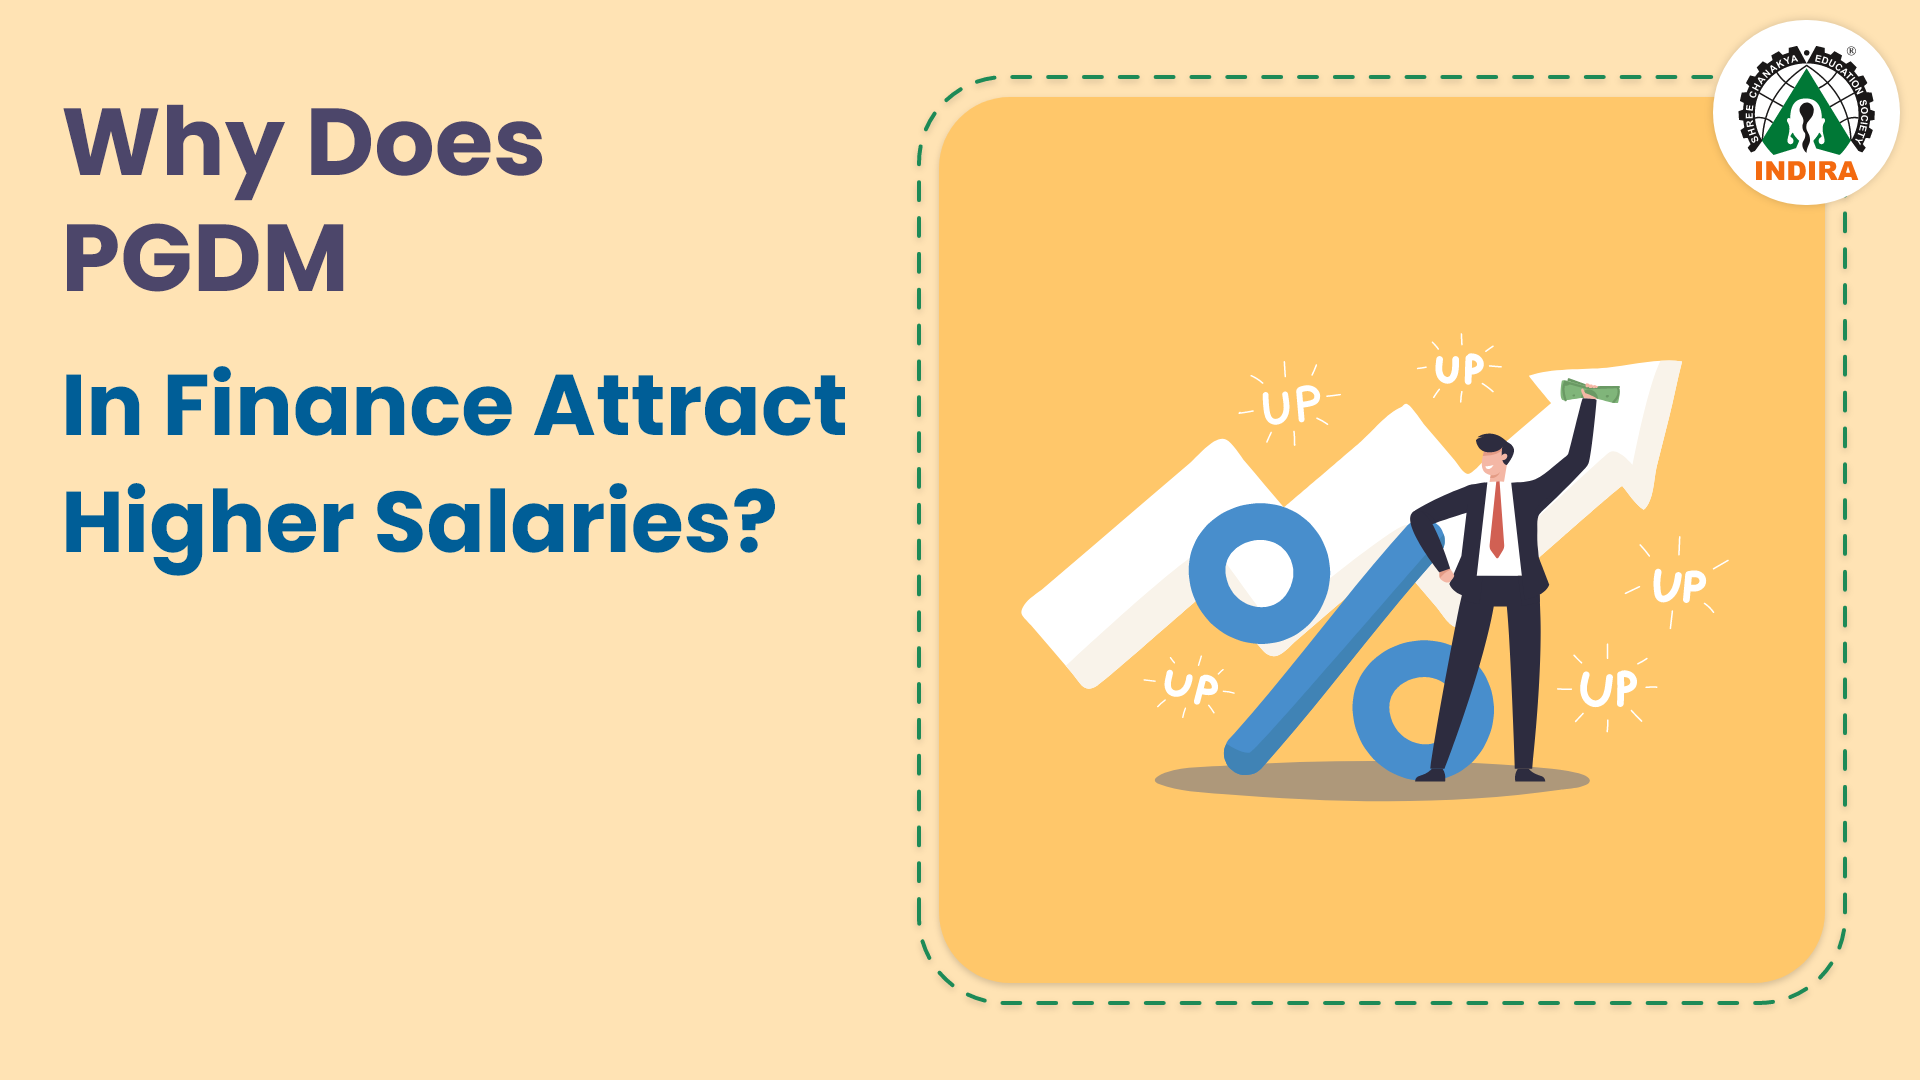 Why Does PGDM In Finance Attract Higher Salaries?